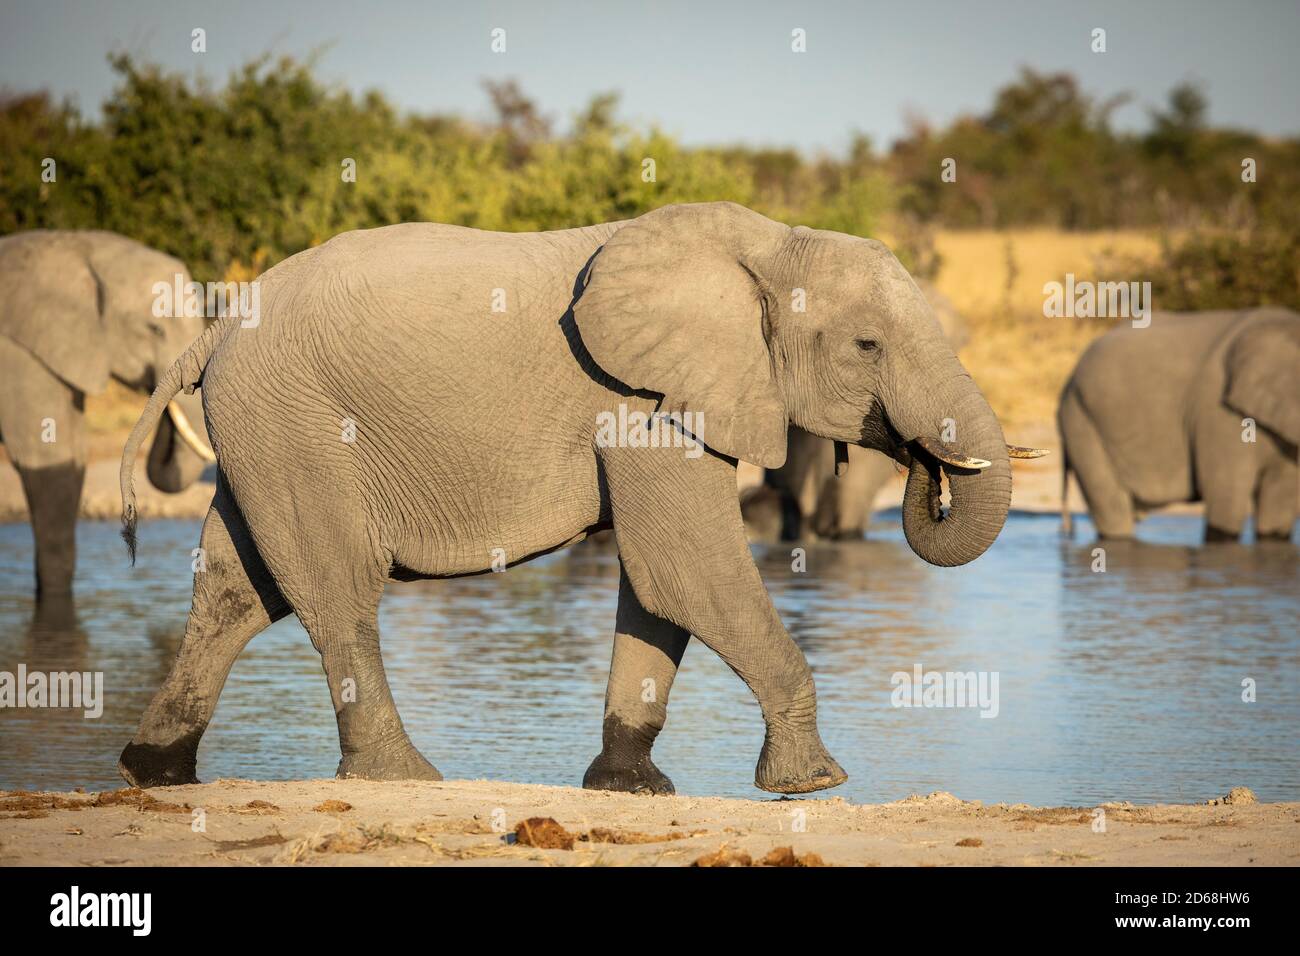 Female elephant drinking water while walking at the edge of river with its herd standing in water in the background in Savuti in Botswana Stock Photo